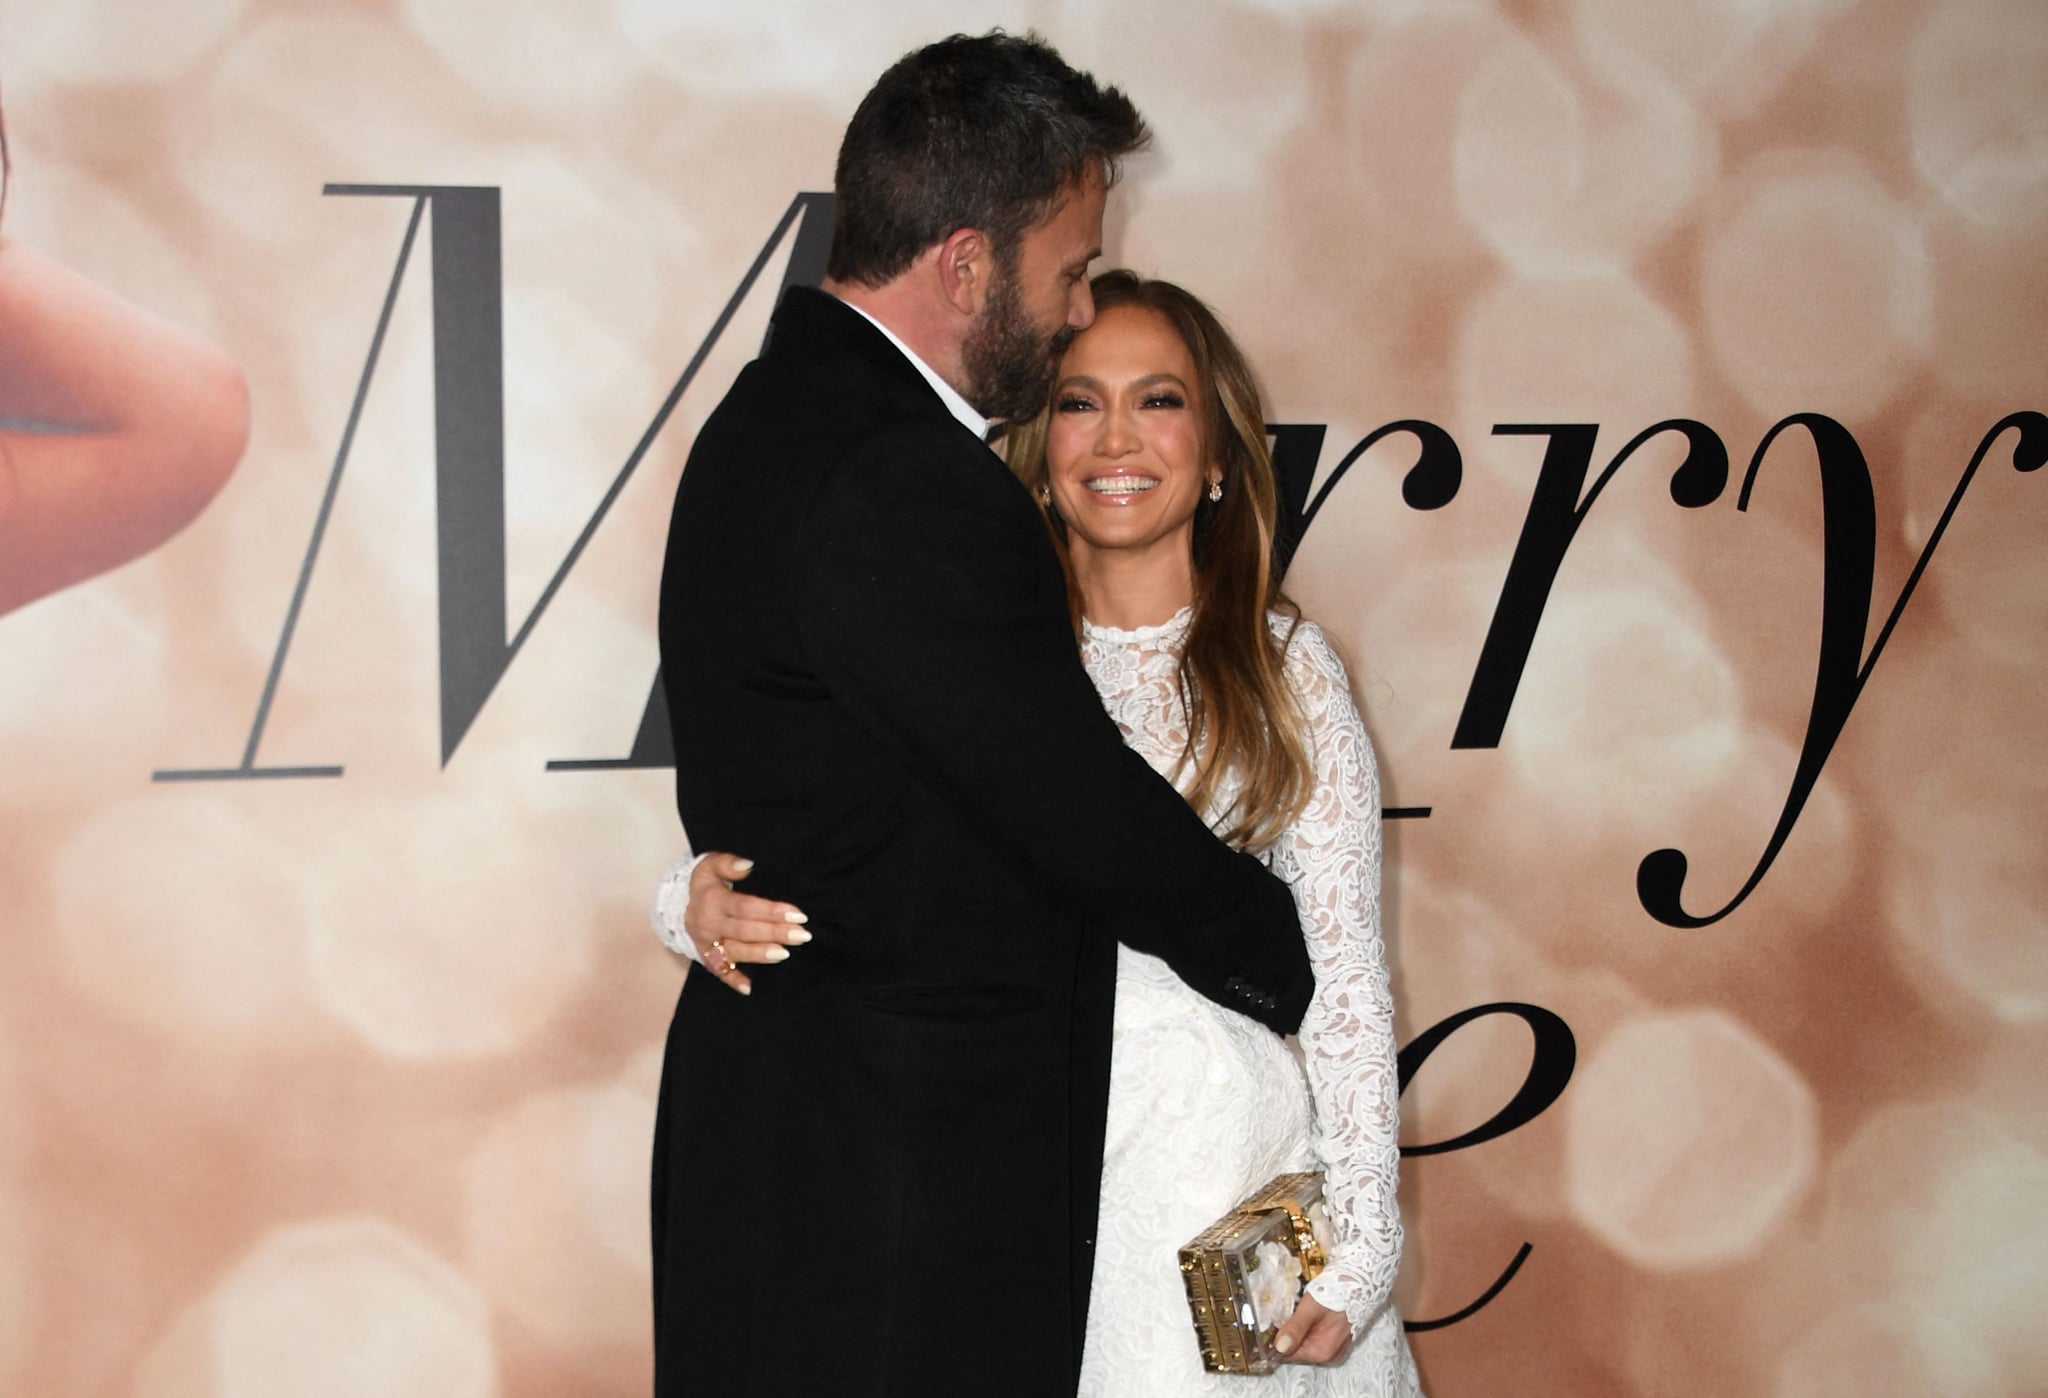 Jennifer Lopez drops jaws in white mini lace dress at ‘Marry Me’ premiere with Ben Affleck